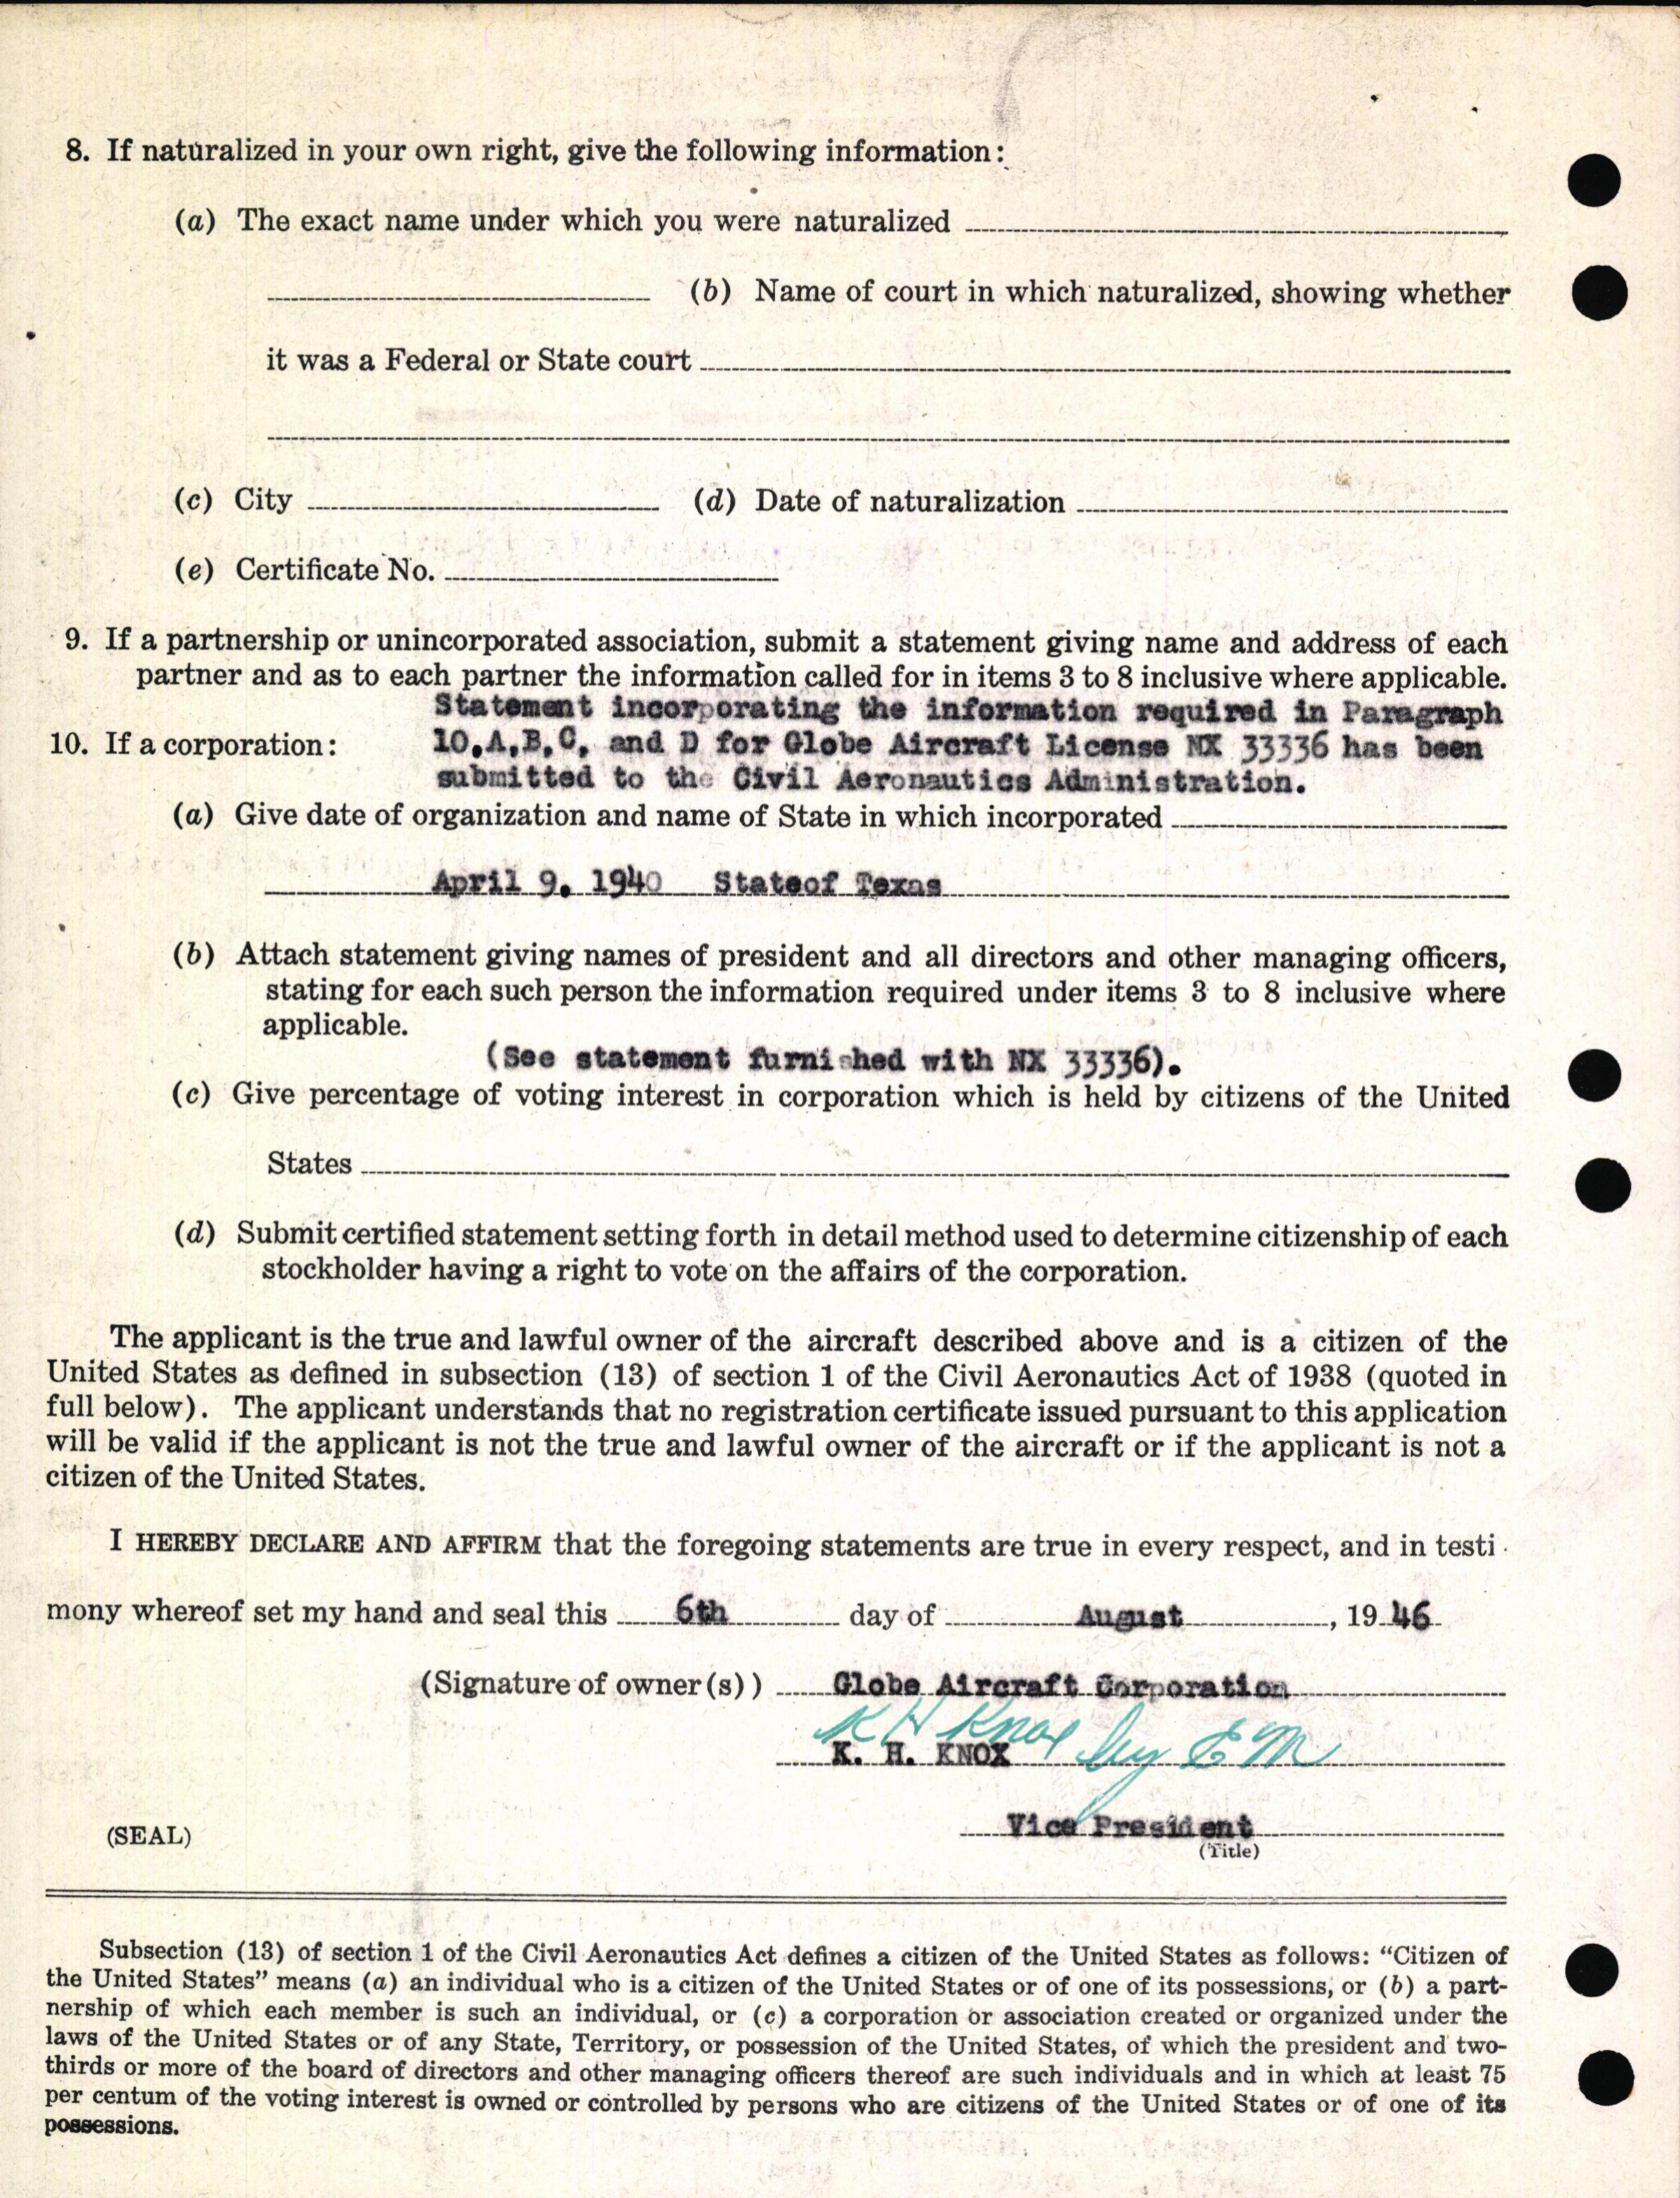 Sample page 4 from AirCorps Library document: Technical Information for Serial Number 1083